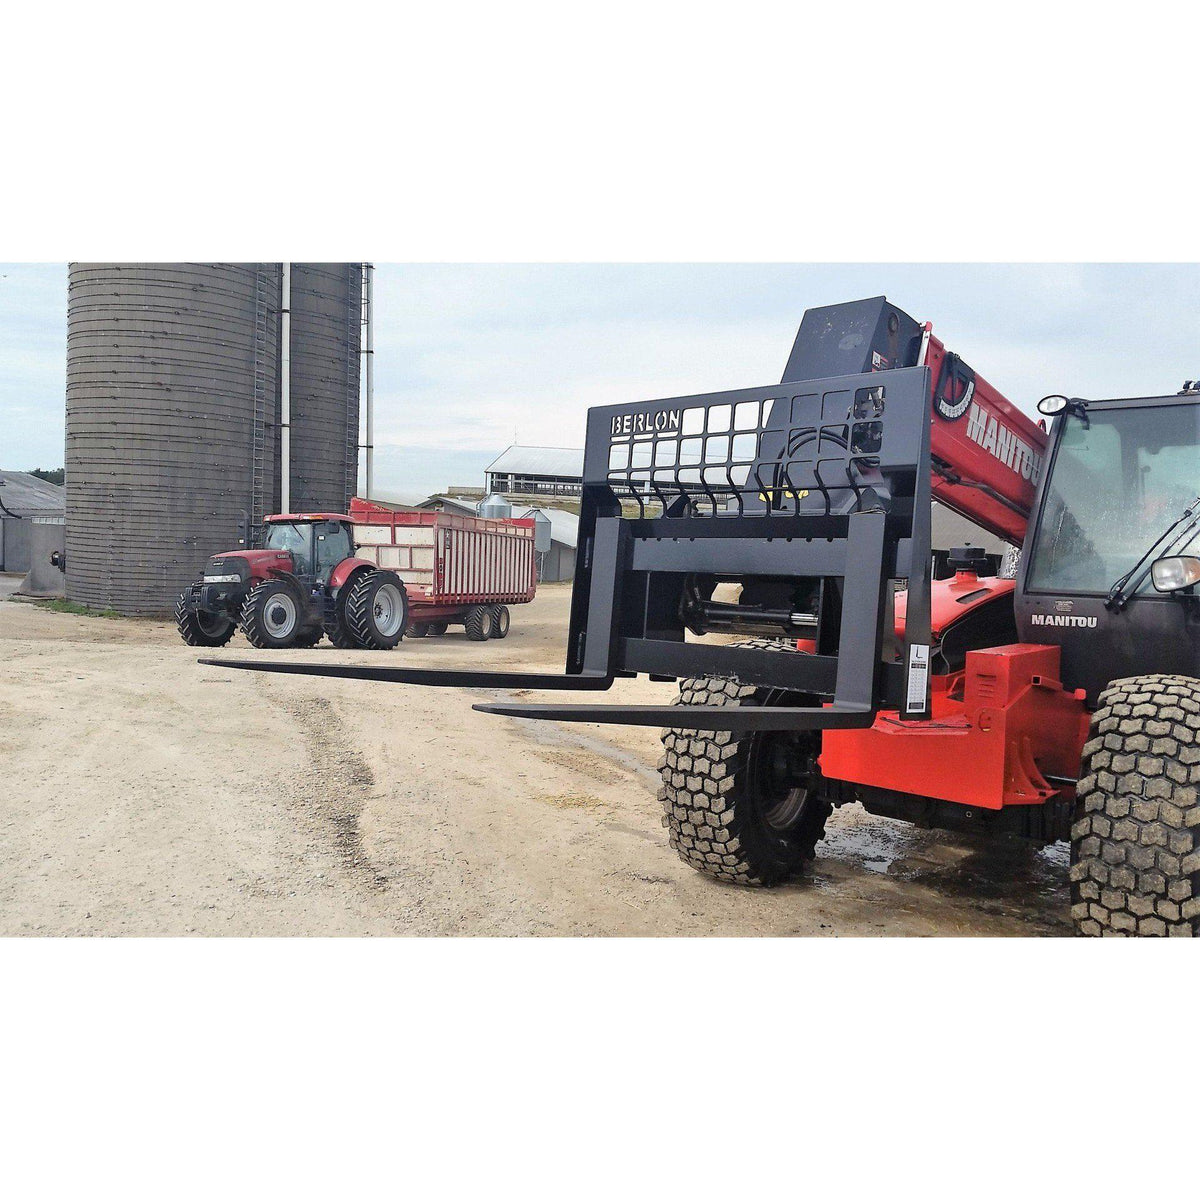 pallet forks attachment from berlon industries in action